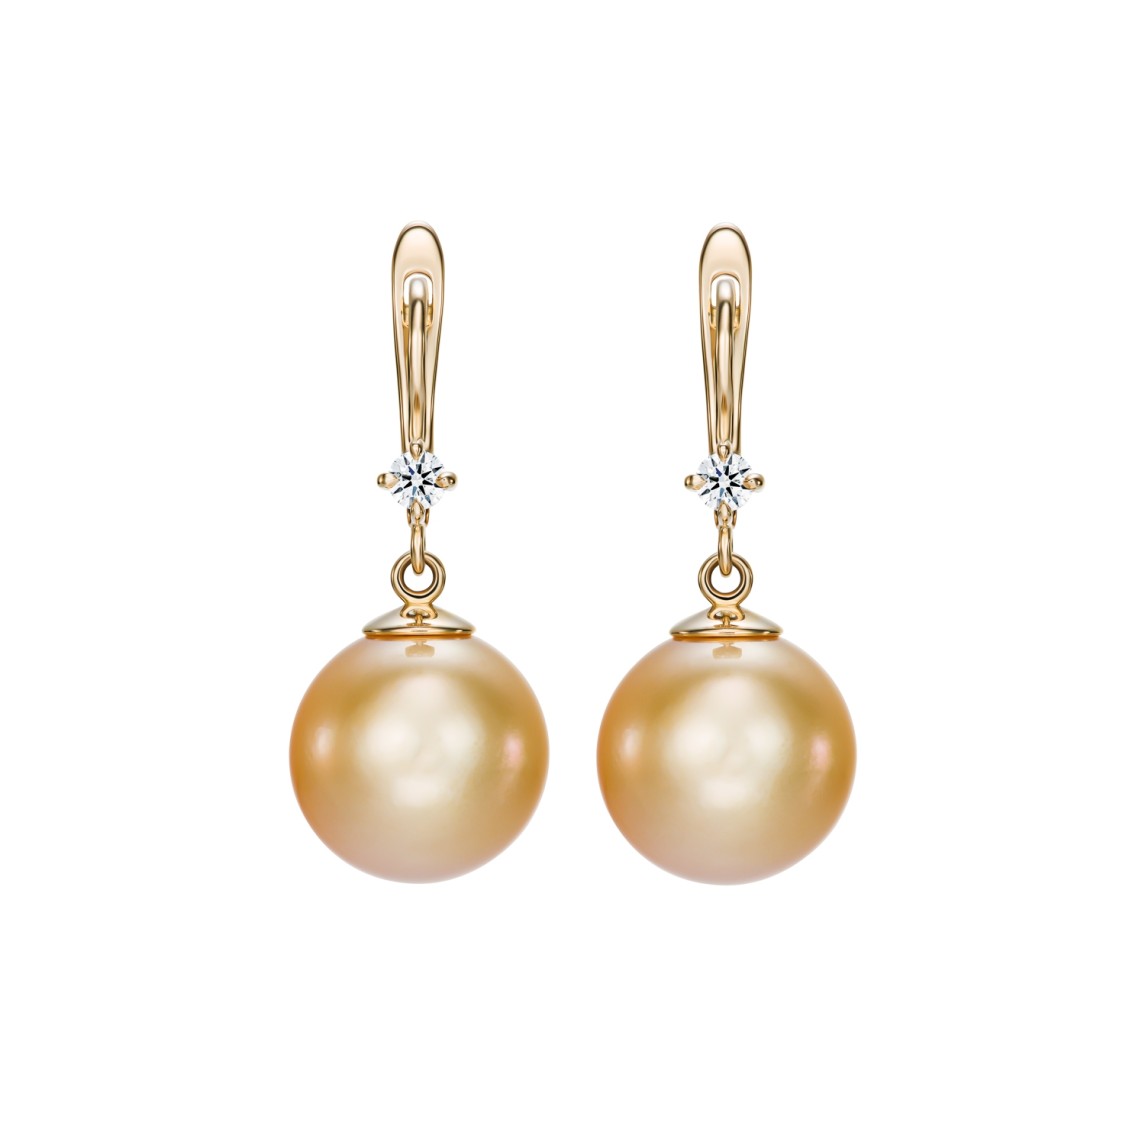 Yellow Gold Earrings With Diamonds And Golden South Sea Pearls